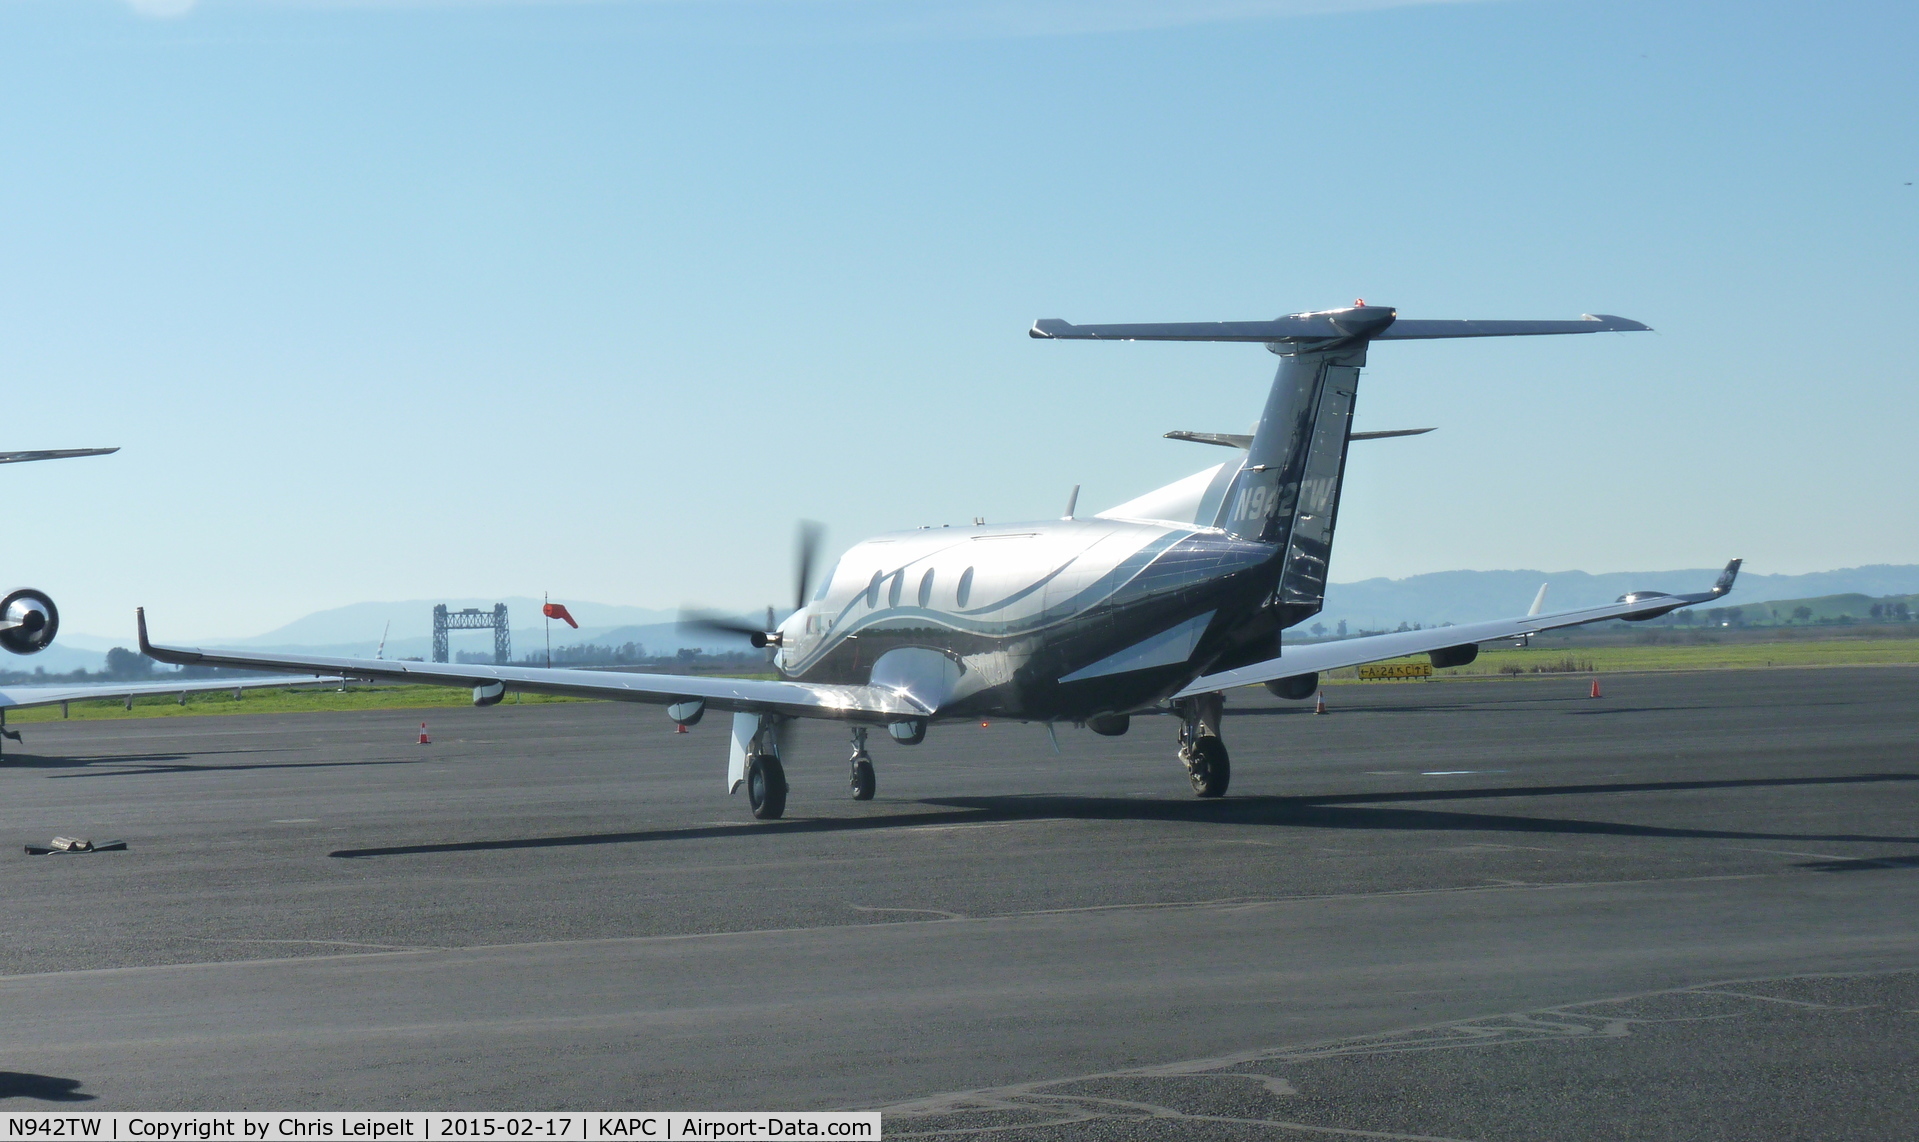 N942TW, 2005 Pilatus PC-12/45 C/N 636, A 2005 Pilatus PC-12/45 started up and getting ready to depart Napa Airport, CA.